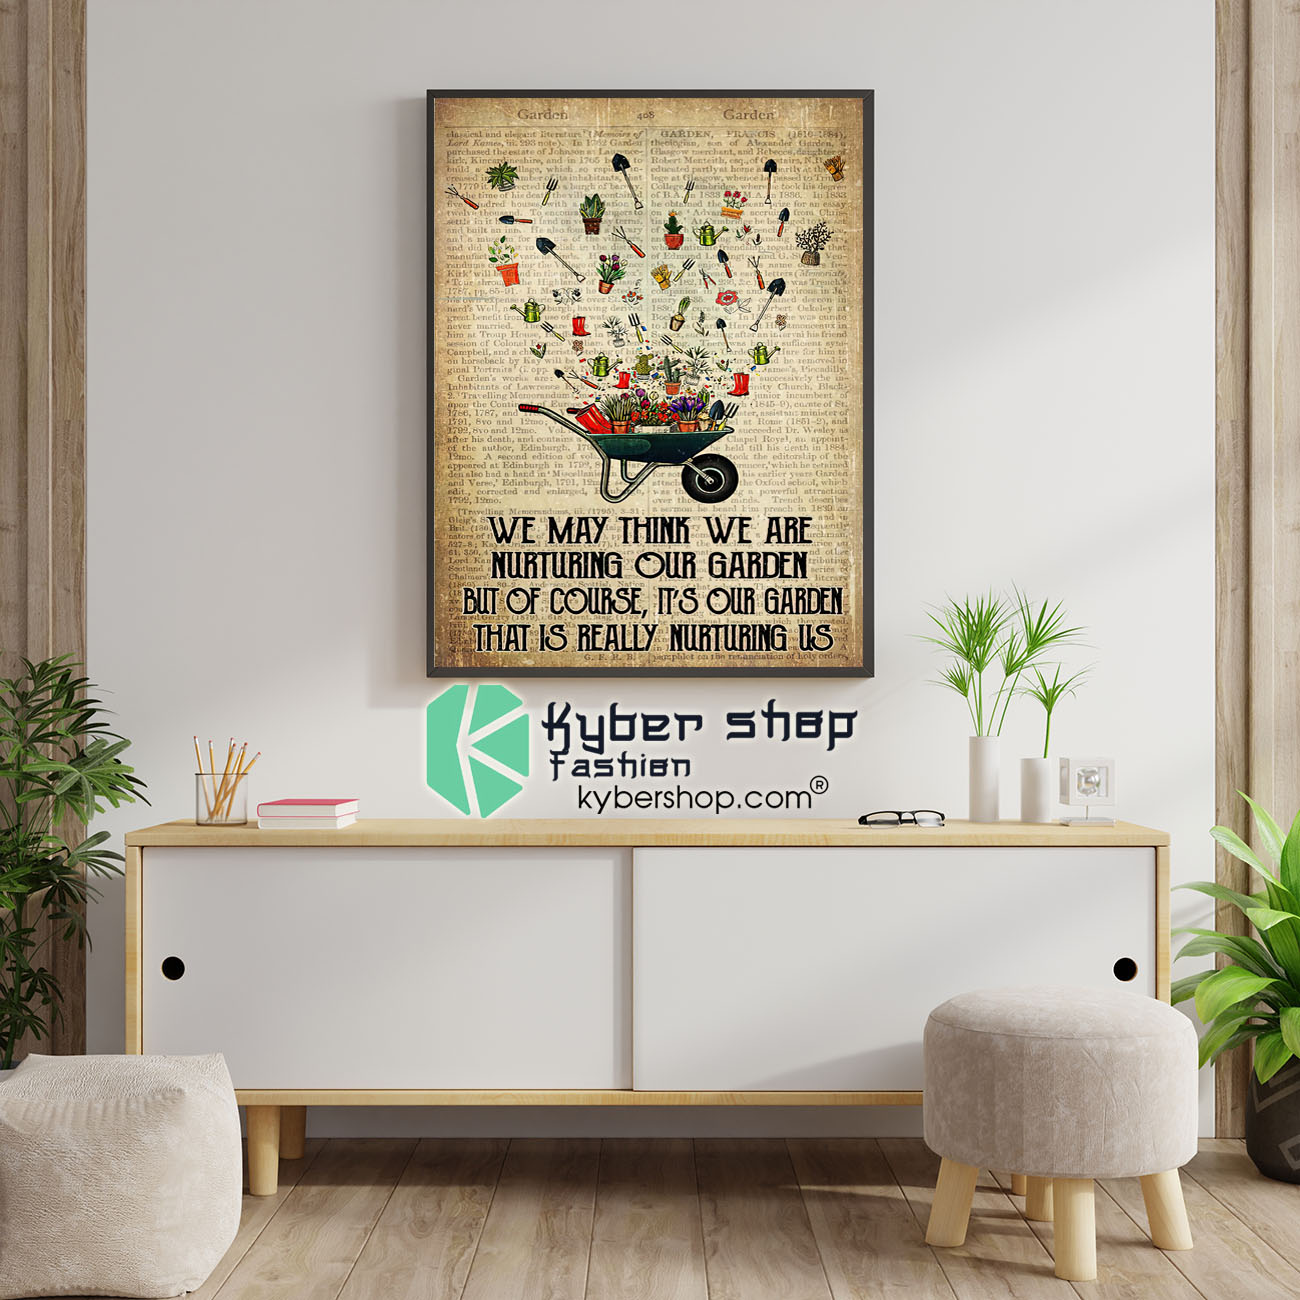 We may think we are nurturing our garden but of course its our garden that is really nurturing us poster 1